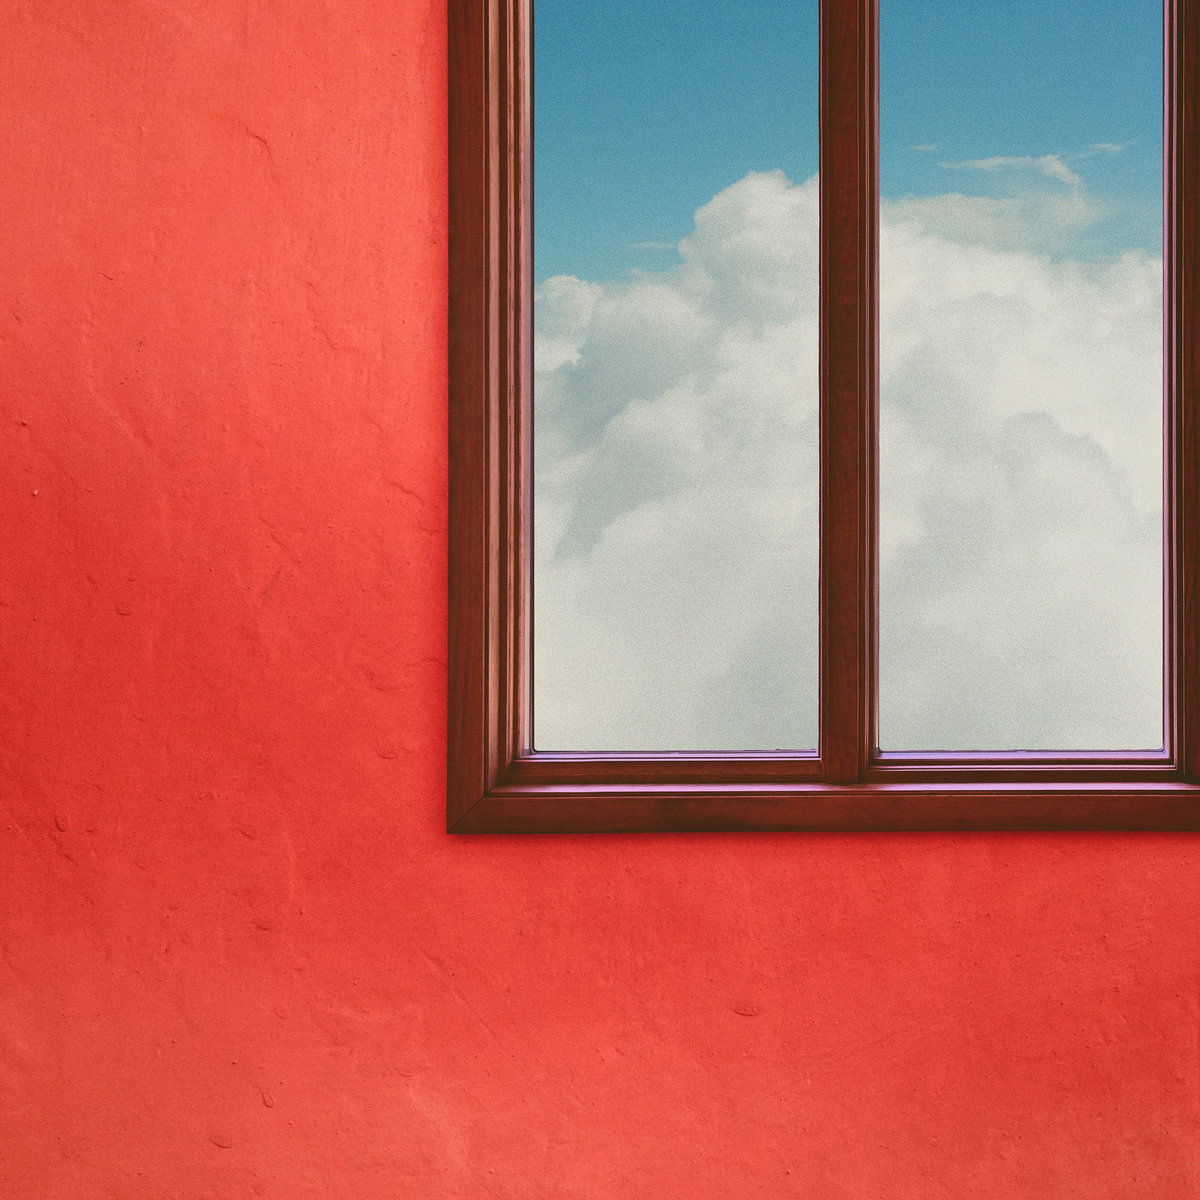 Clouds and a Blue Sky Seen Through A Window On A Red-Orange Wall